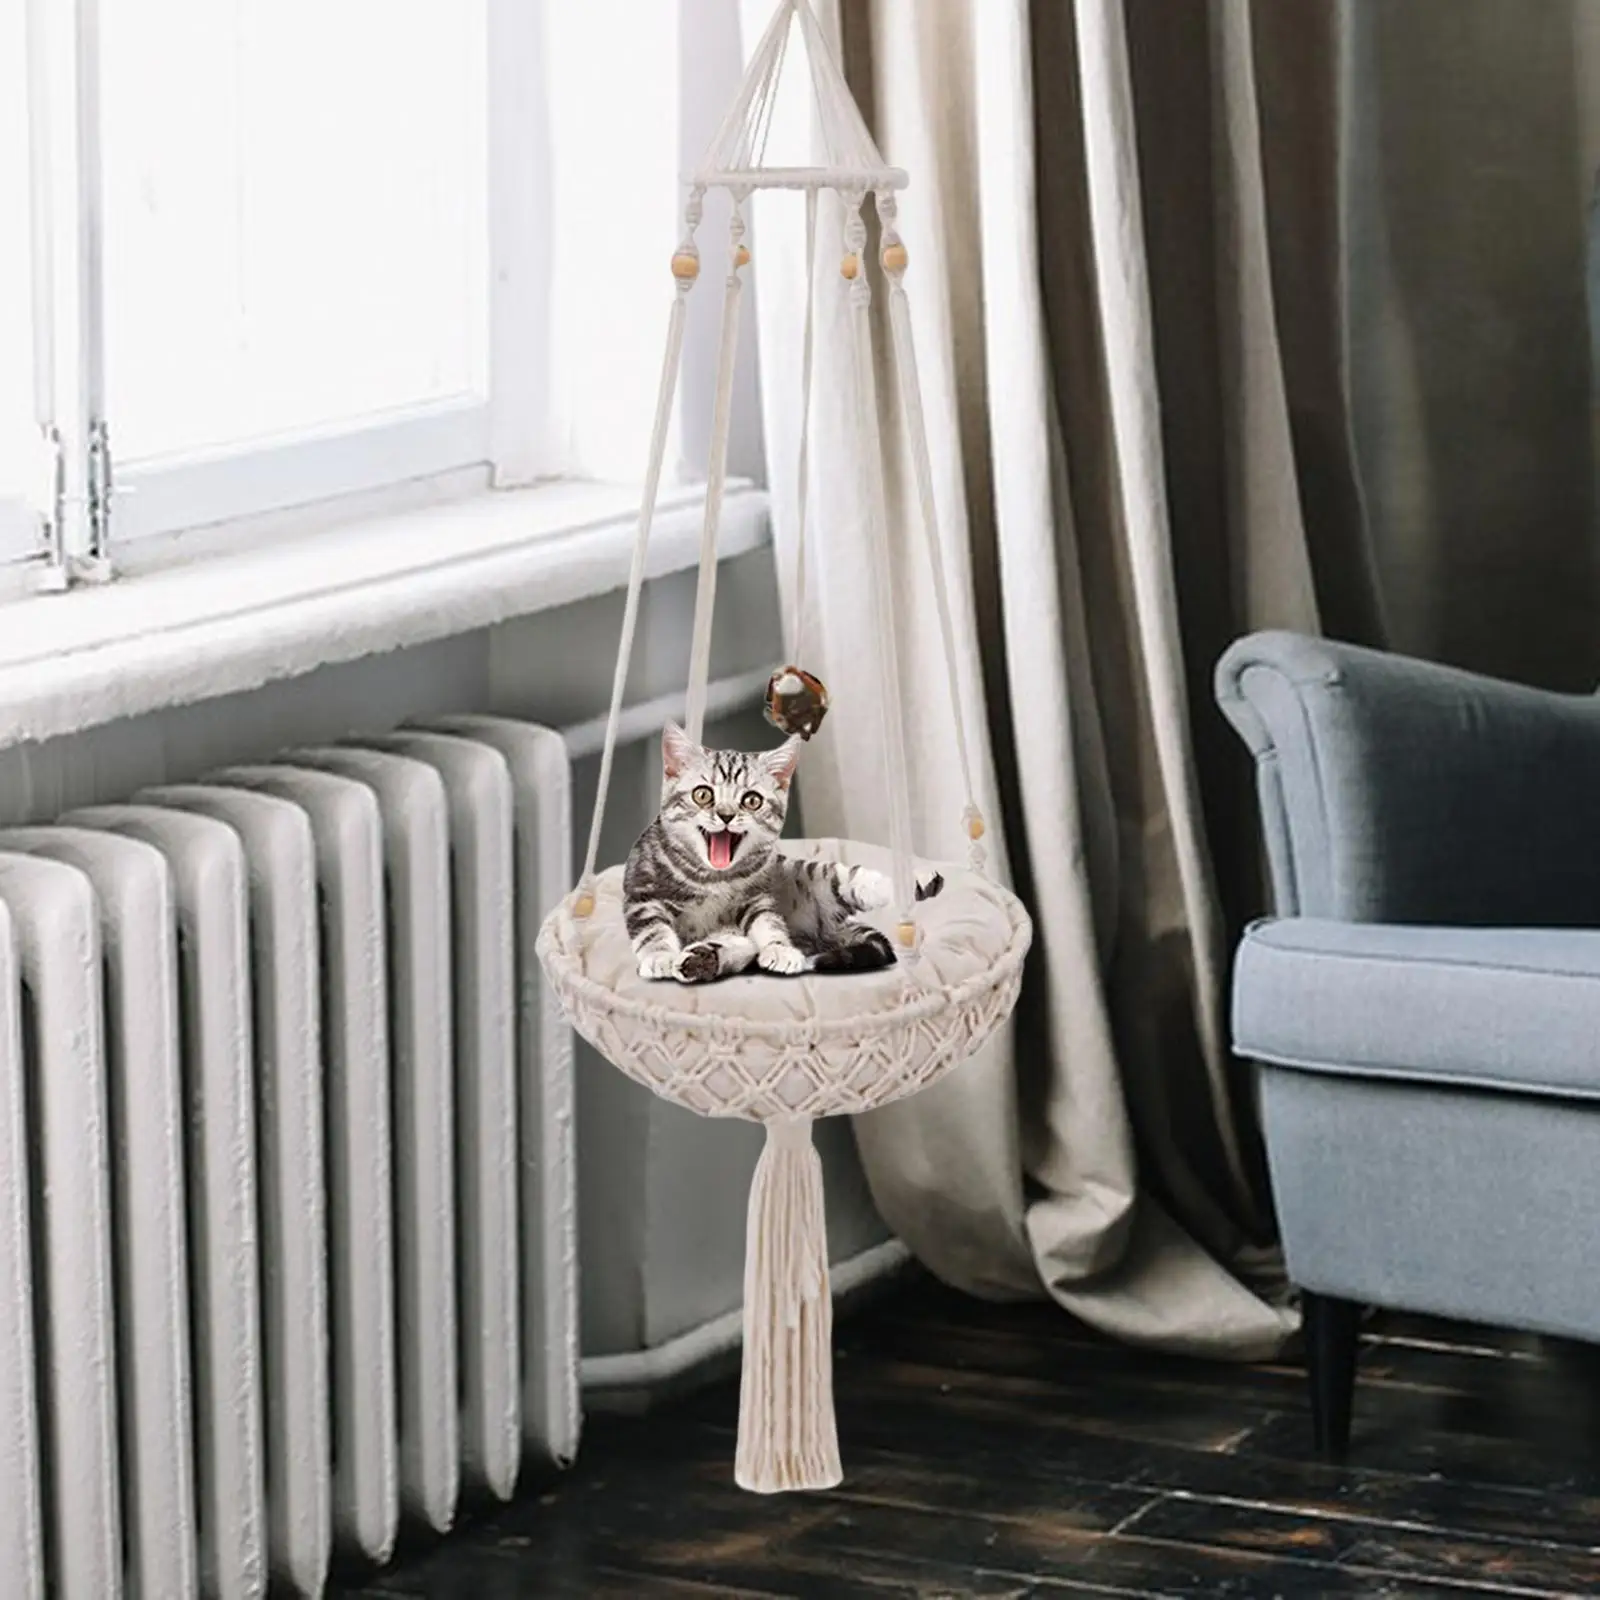 Cat Hammock Handwoven Bohemian Swing Bed with Cushion Hanging Perch Winter Blanket Toy for Basking Home Bedroom Decoration